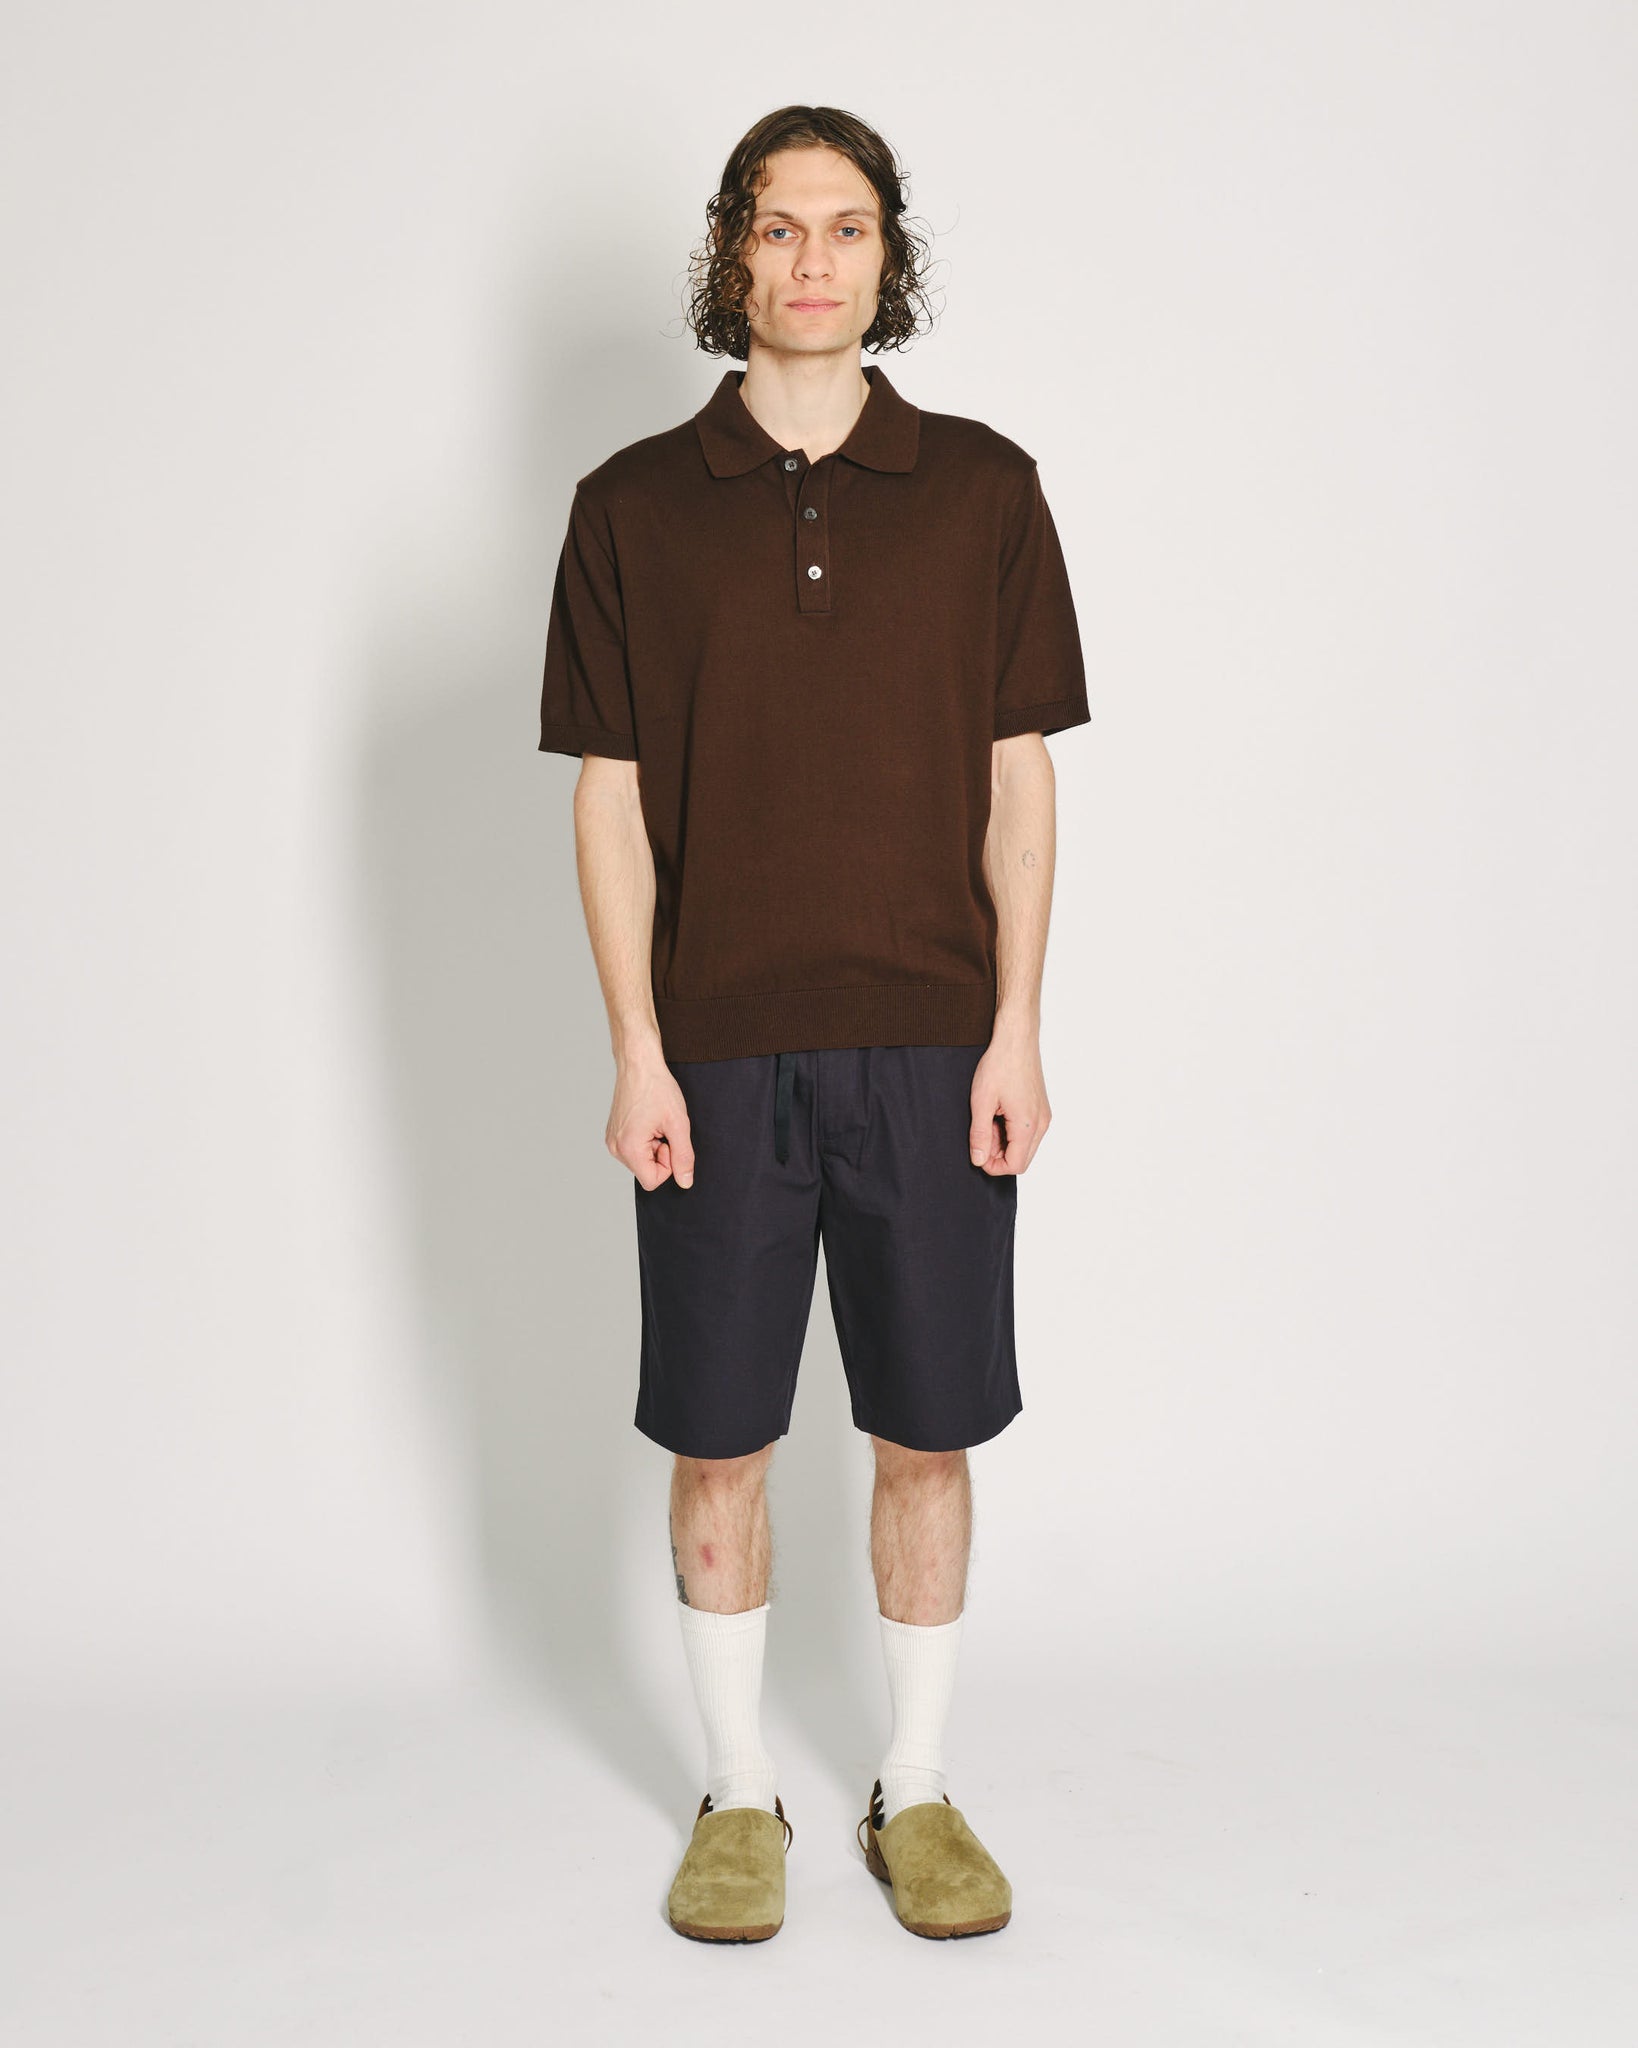 Another Polo Shirt 3.0 - Brown